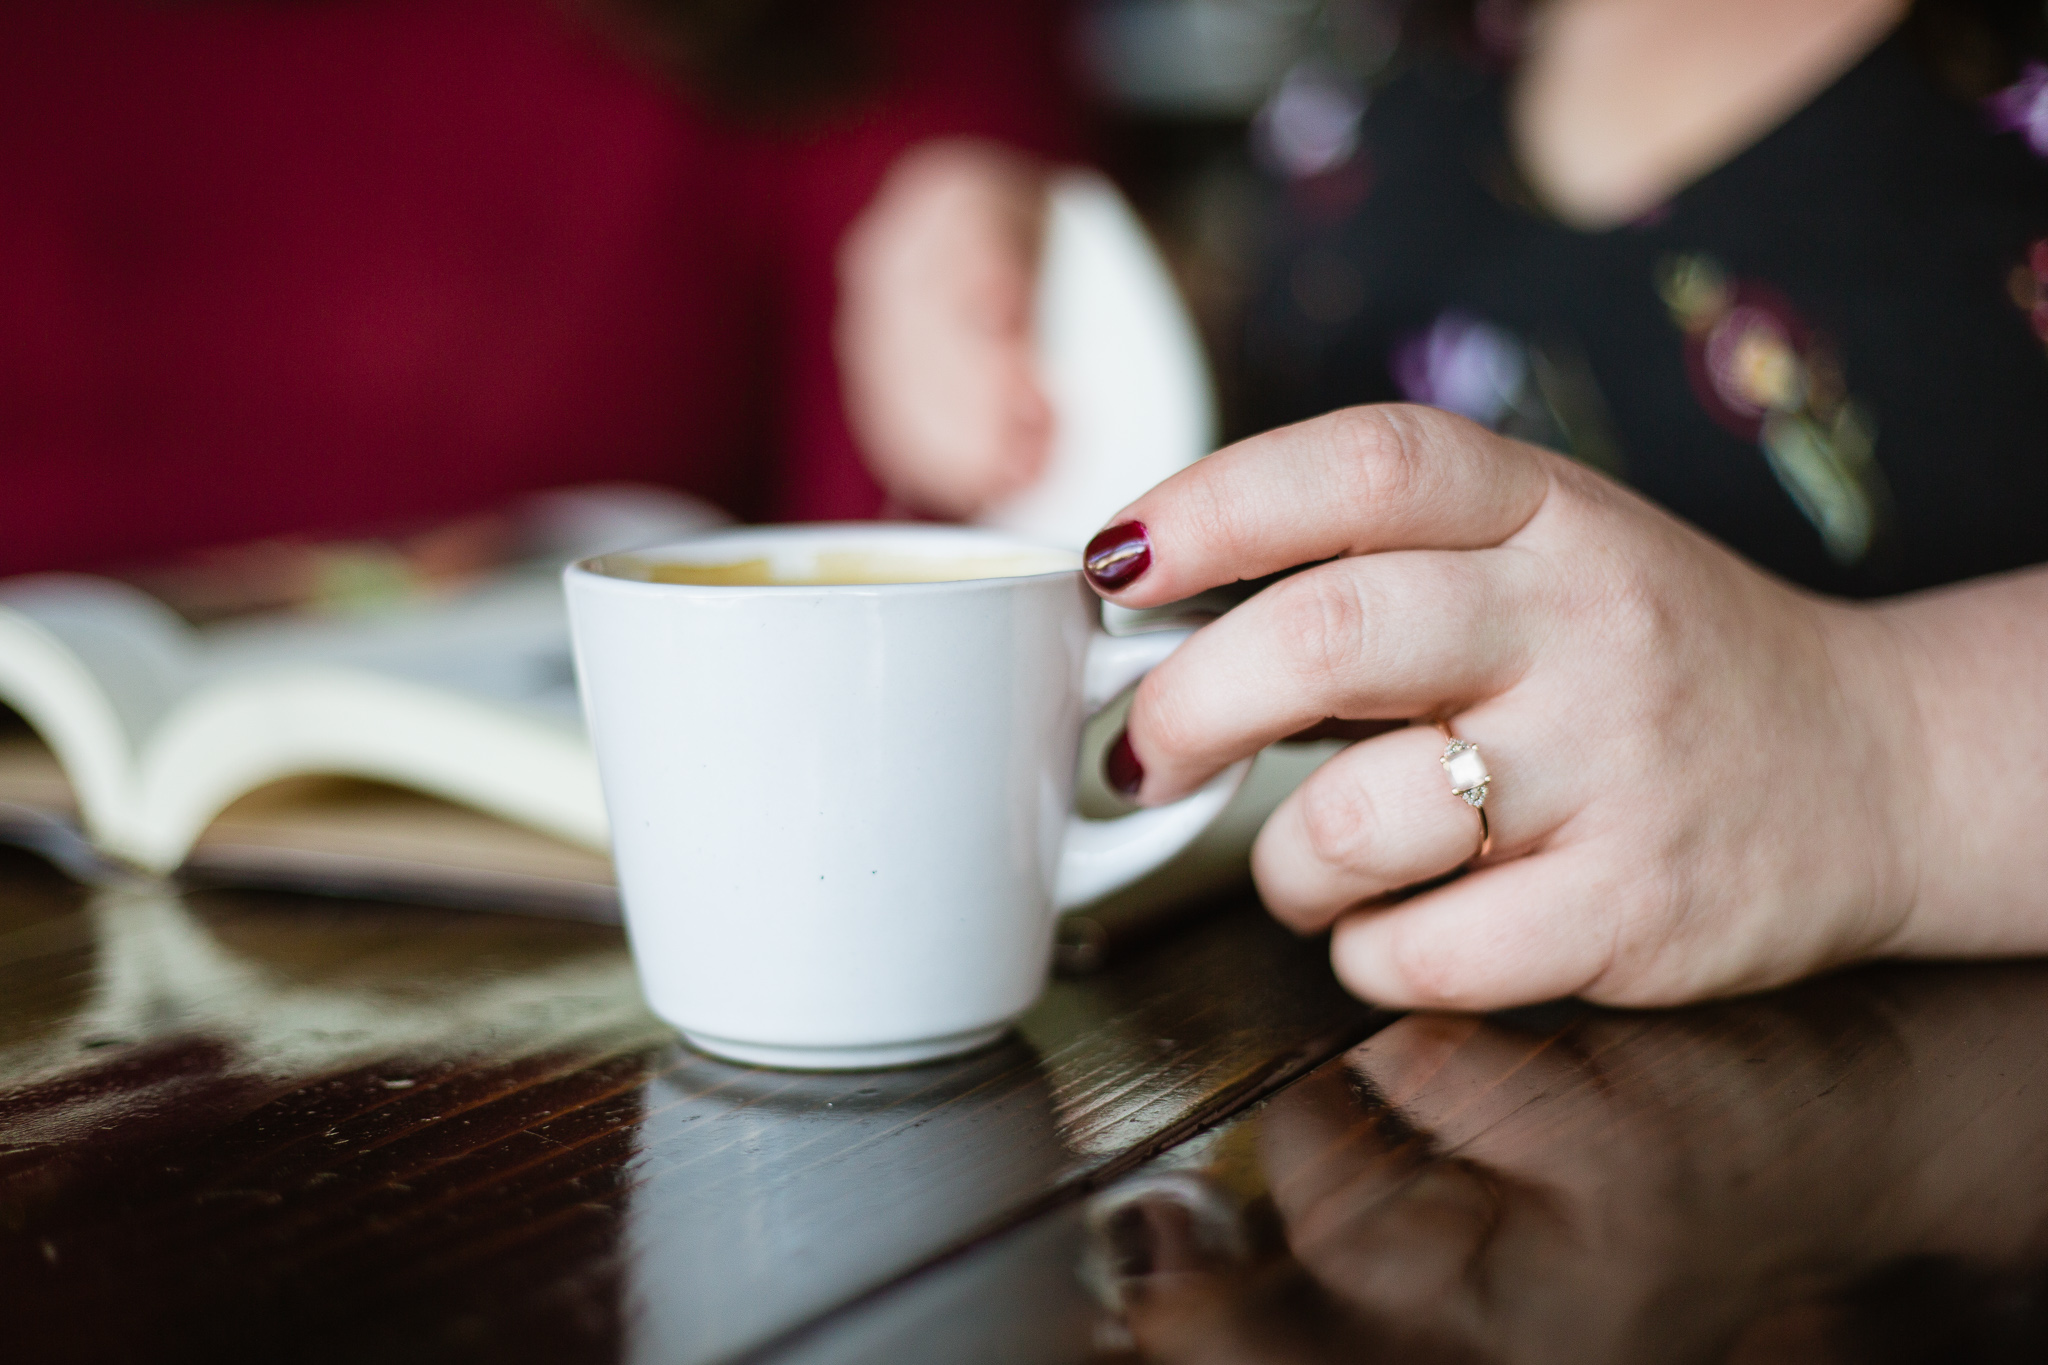 Close up image of a hand touching a coffee cup with an engagement ring.